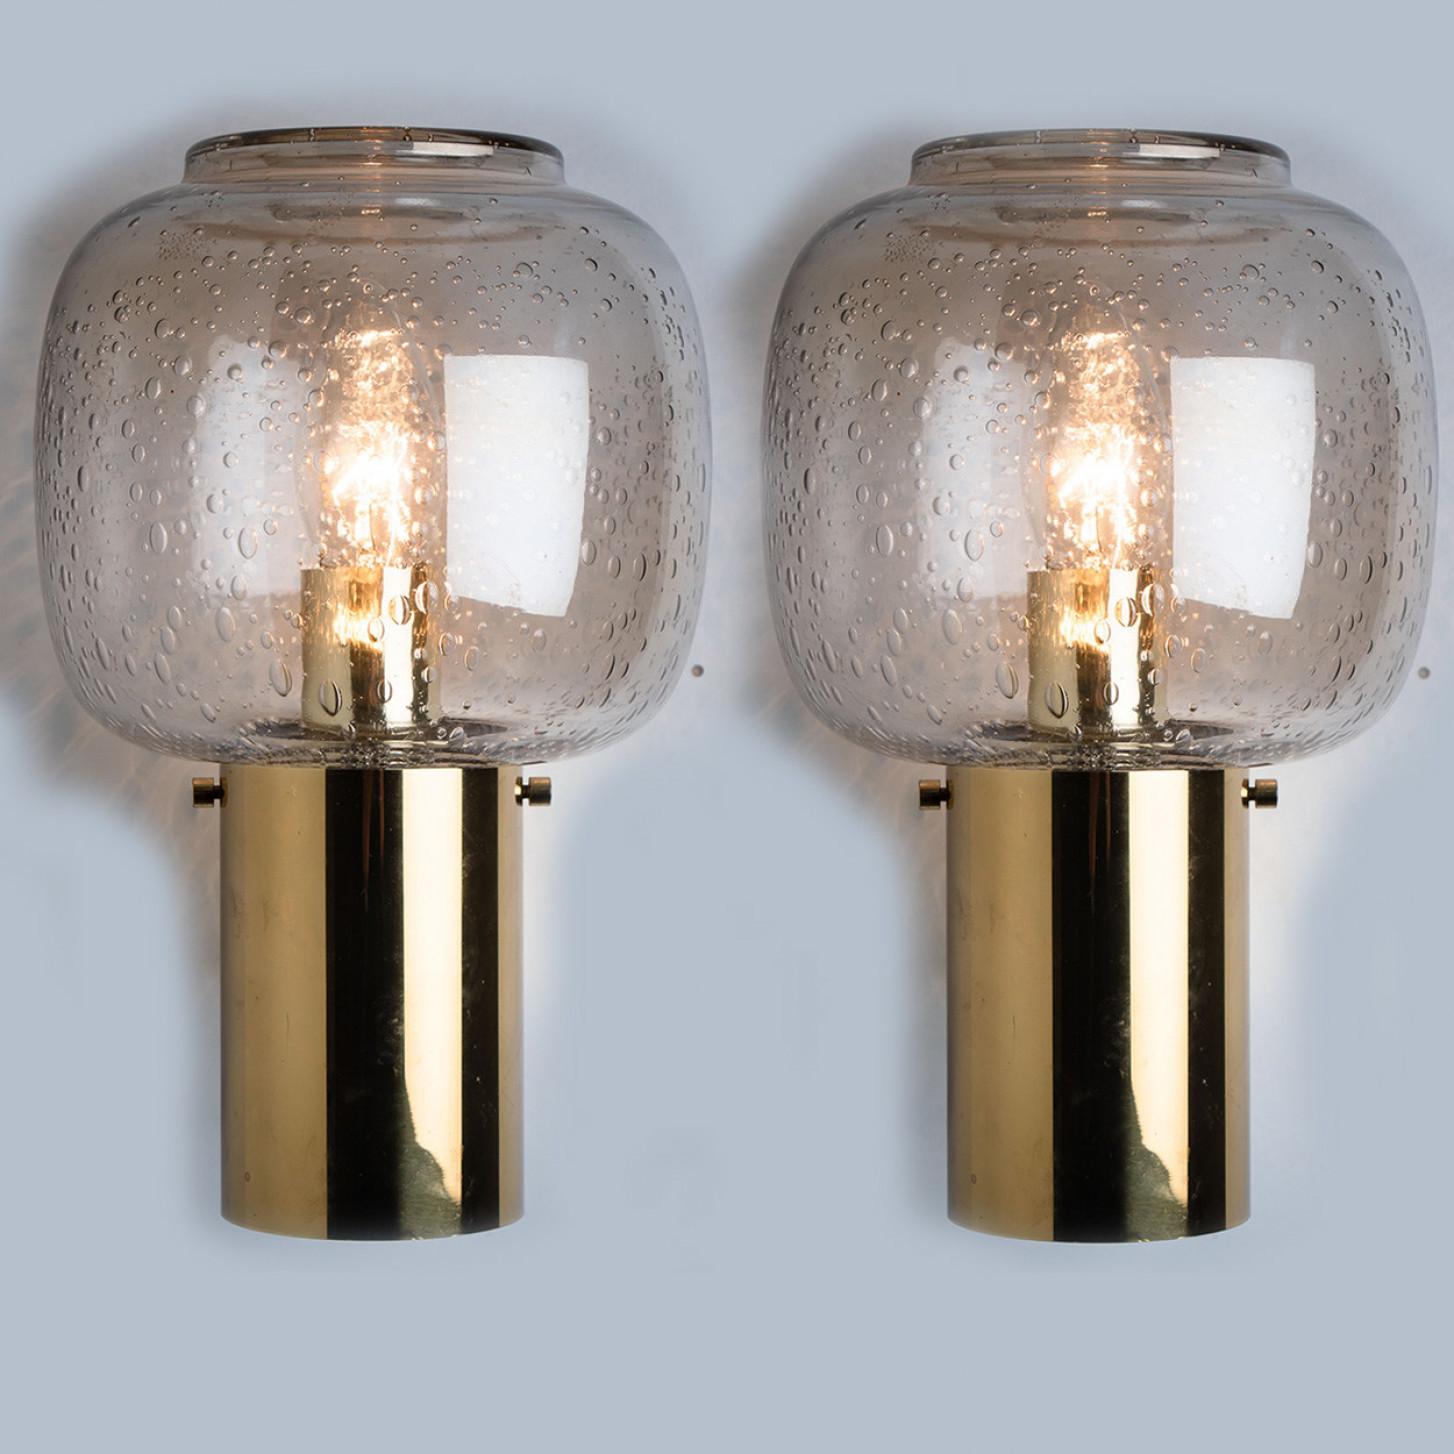 Swedish 1 Of the 3 Brass and Glass Wall Lights in style of Hans Agne Jakobsson , circa 1 For Sale